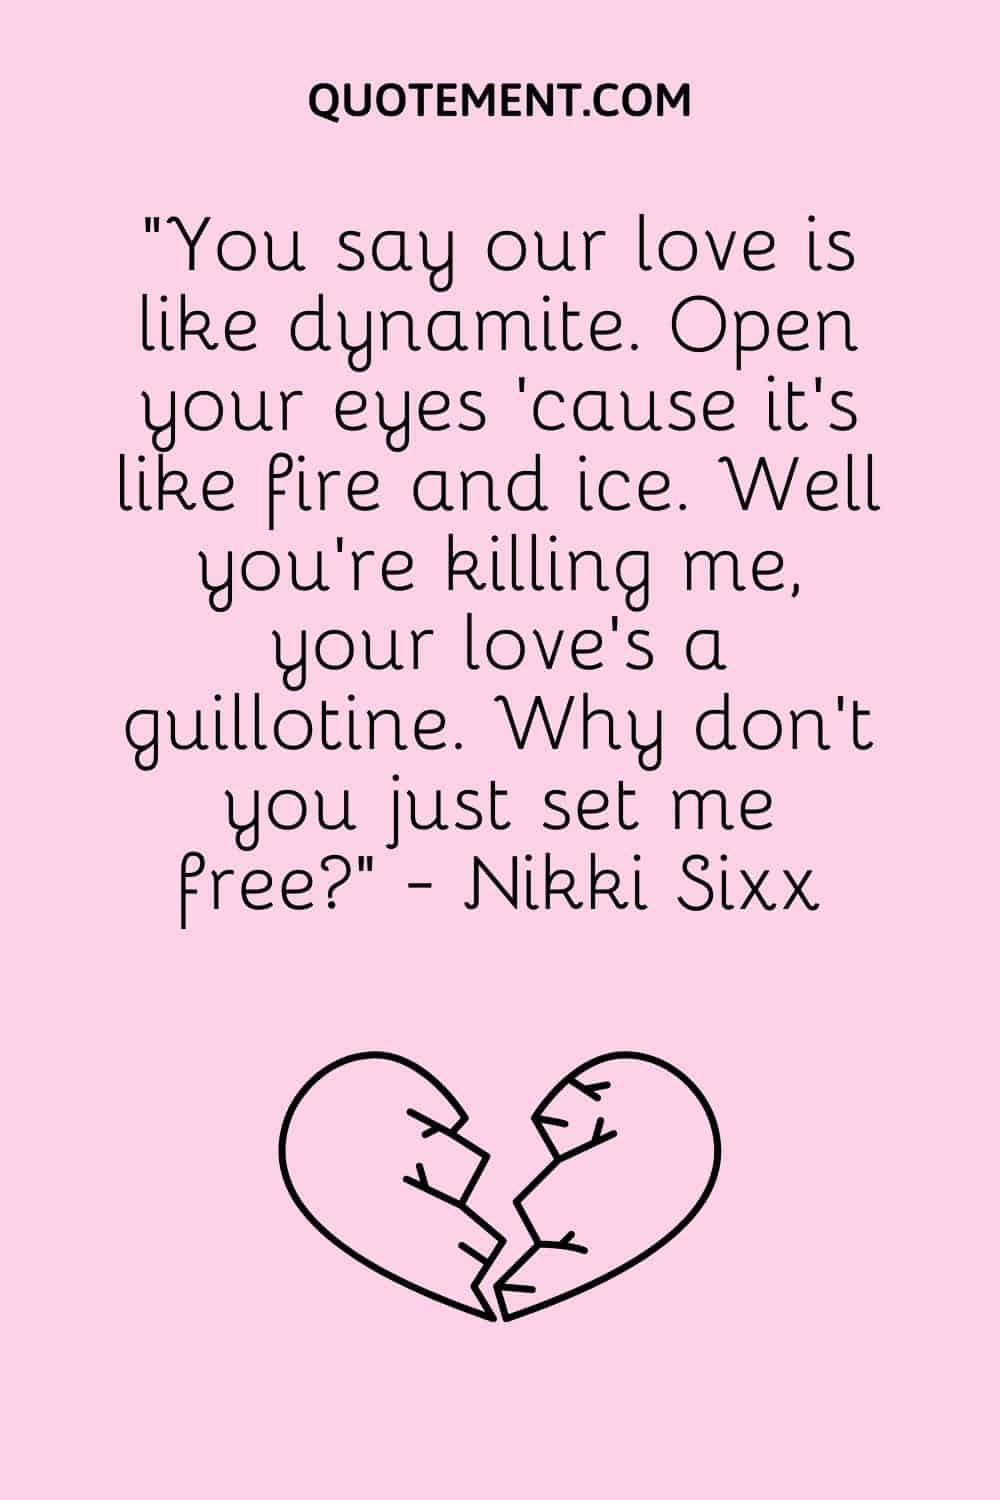 “You say our love is like dynamite. Open your eyes 'cause it's like fire and ice. Well you're killing me, your love's a guillotine. Why don't you just set me free” - Nikki Sixx